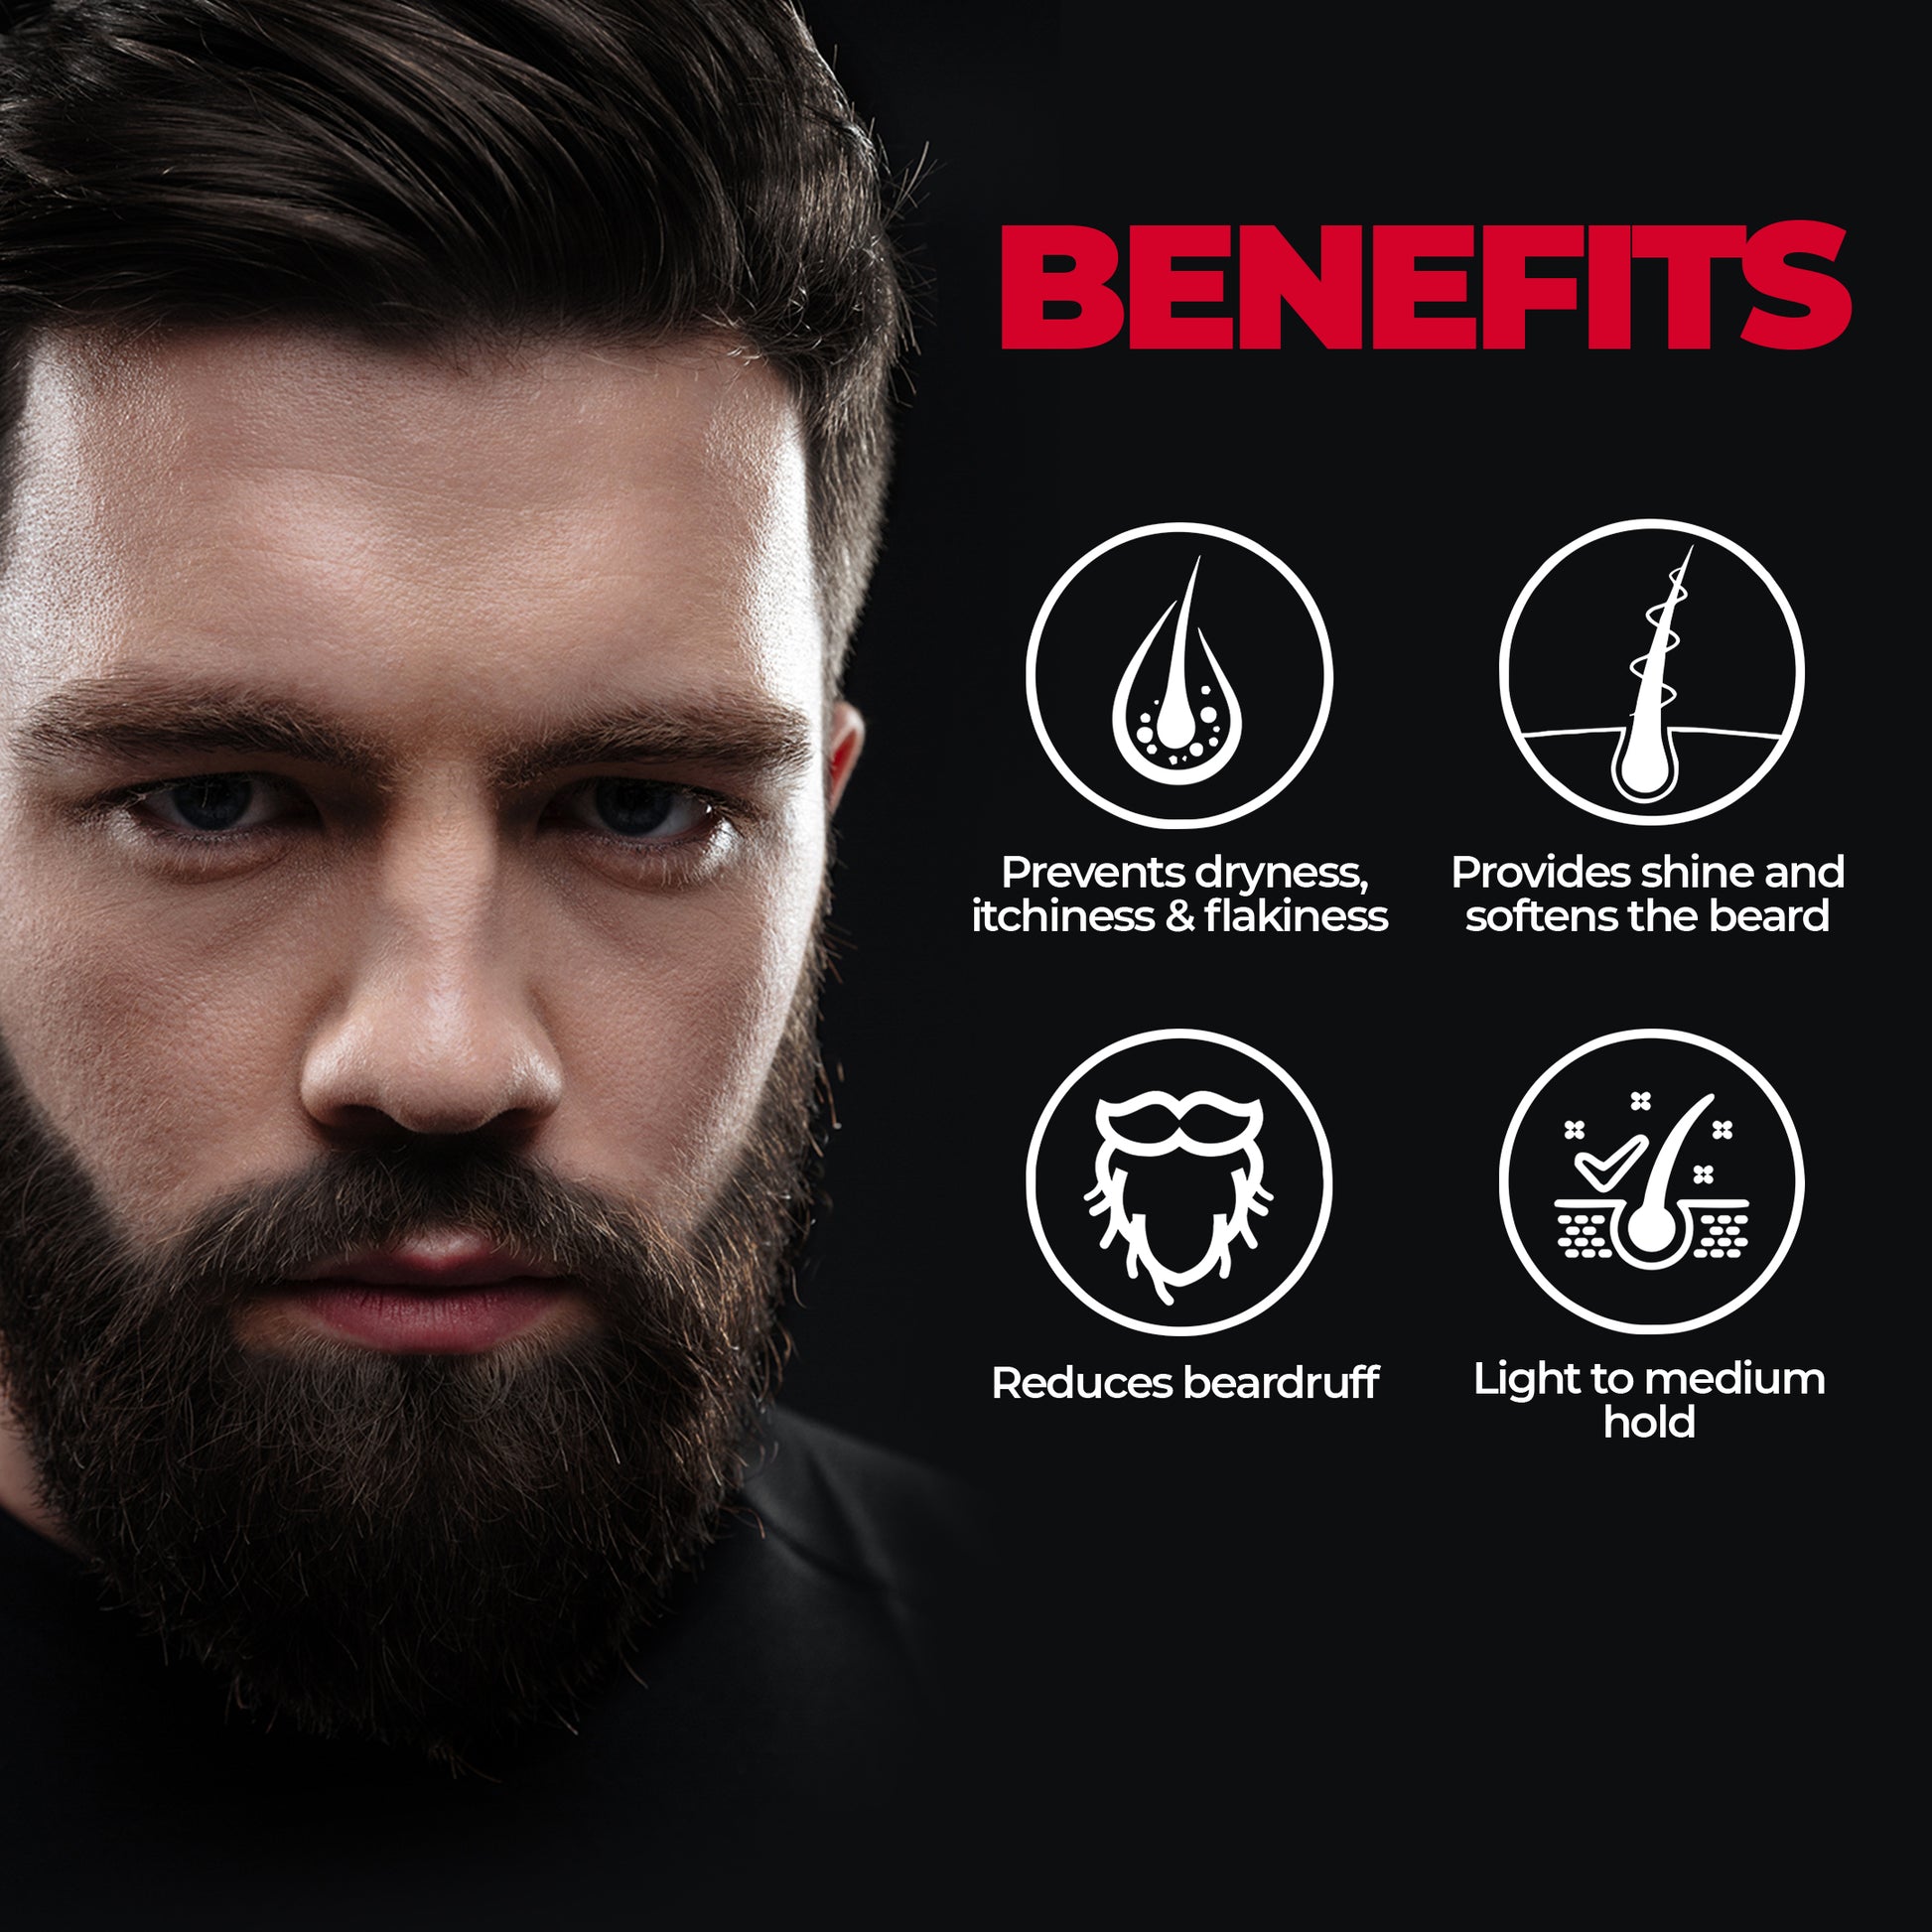 Does beard balm really work?, Is it OK to use beard balm everyday?, What is beard balm used for?